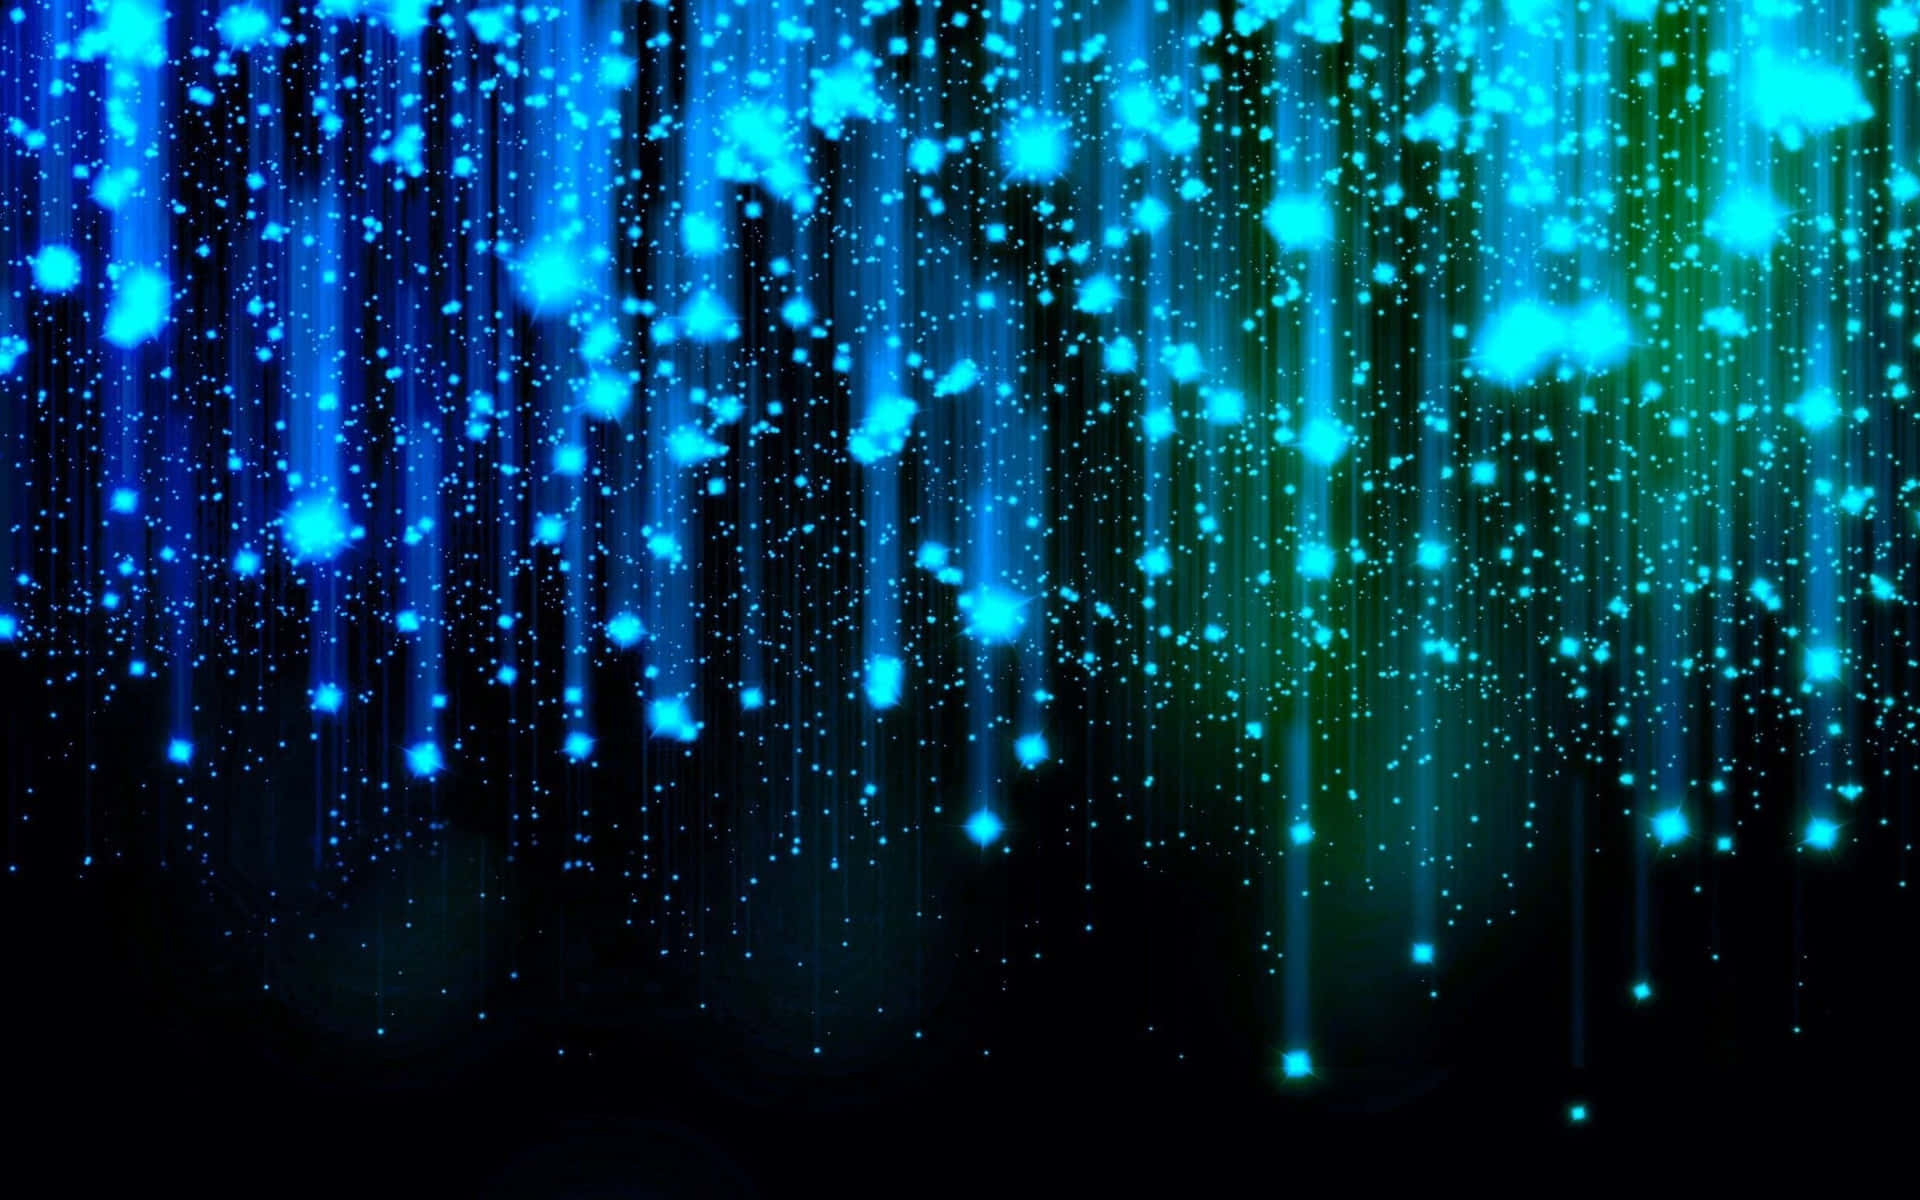 Blue And Green Rain Drops On A Black Background